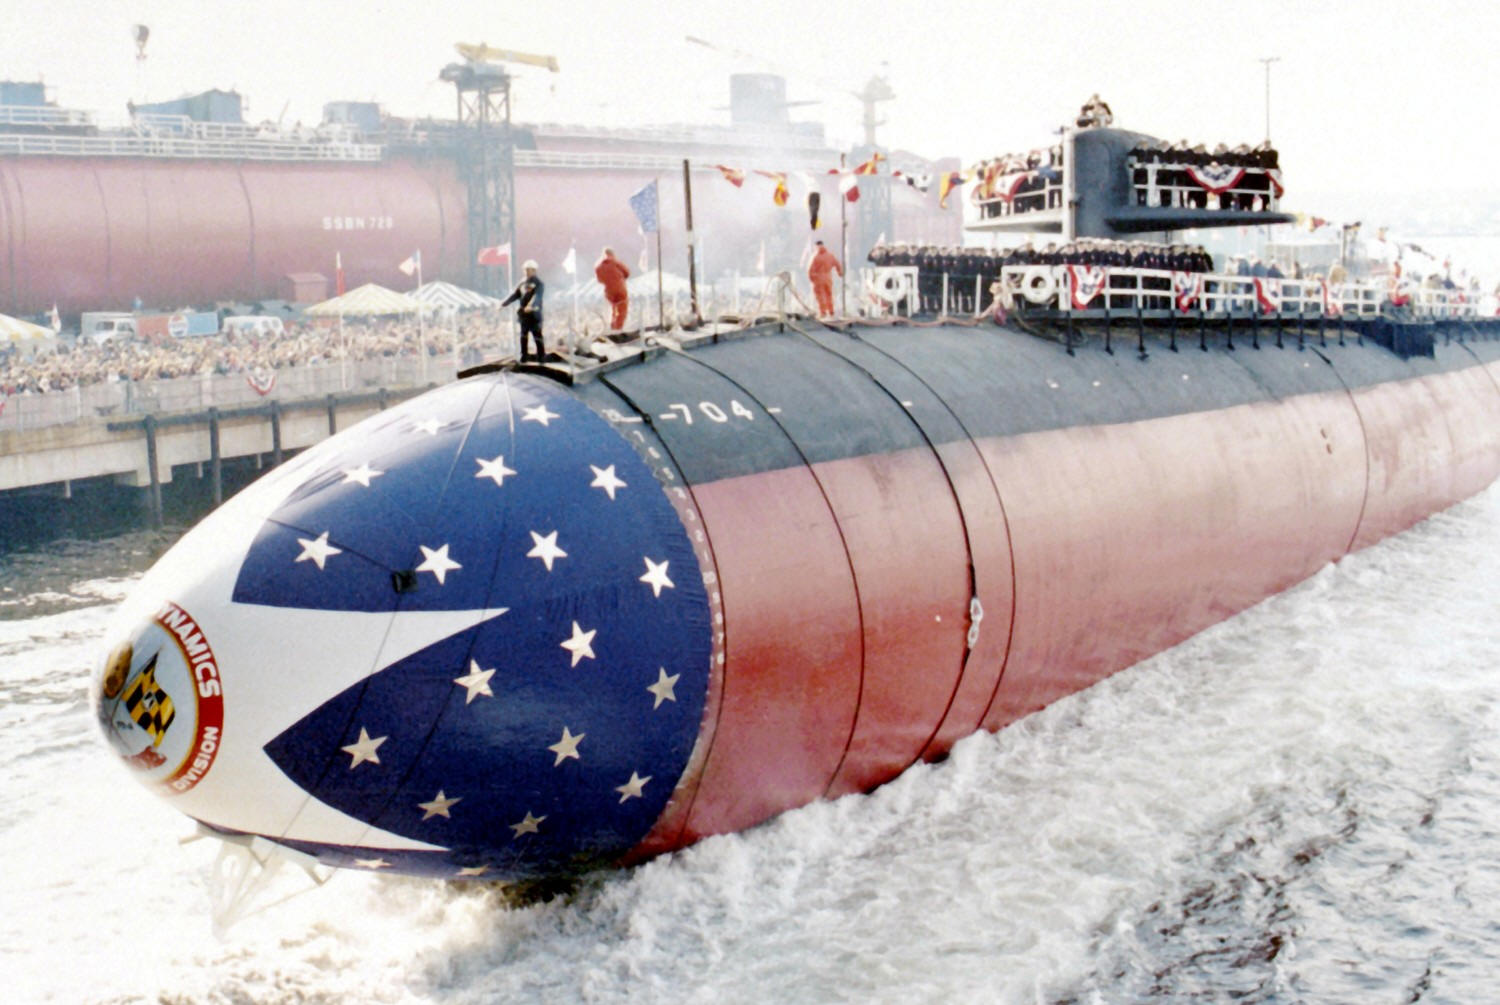 ssn-704 uss baltimore launching ceremony december 1980